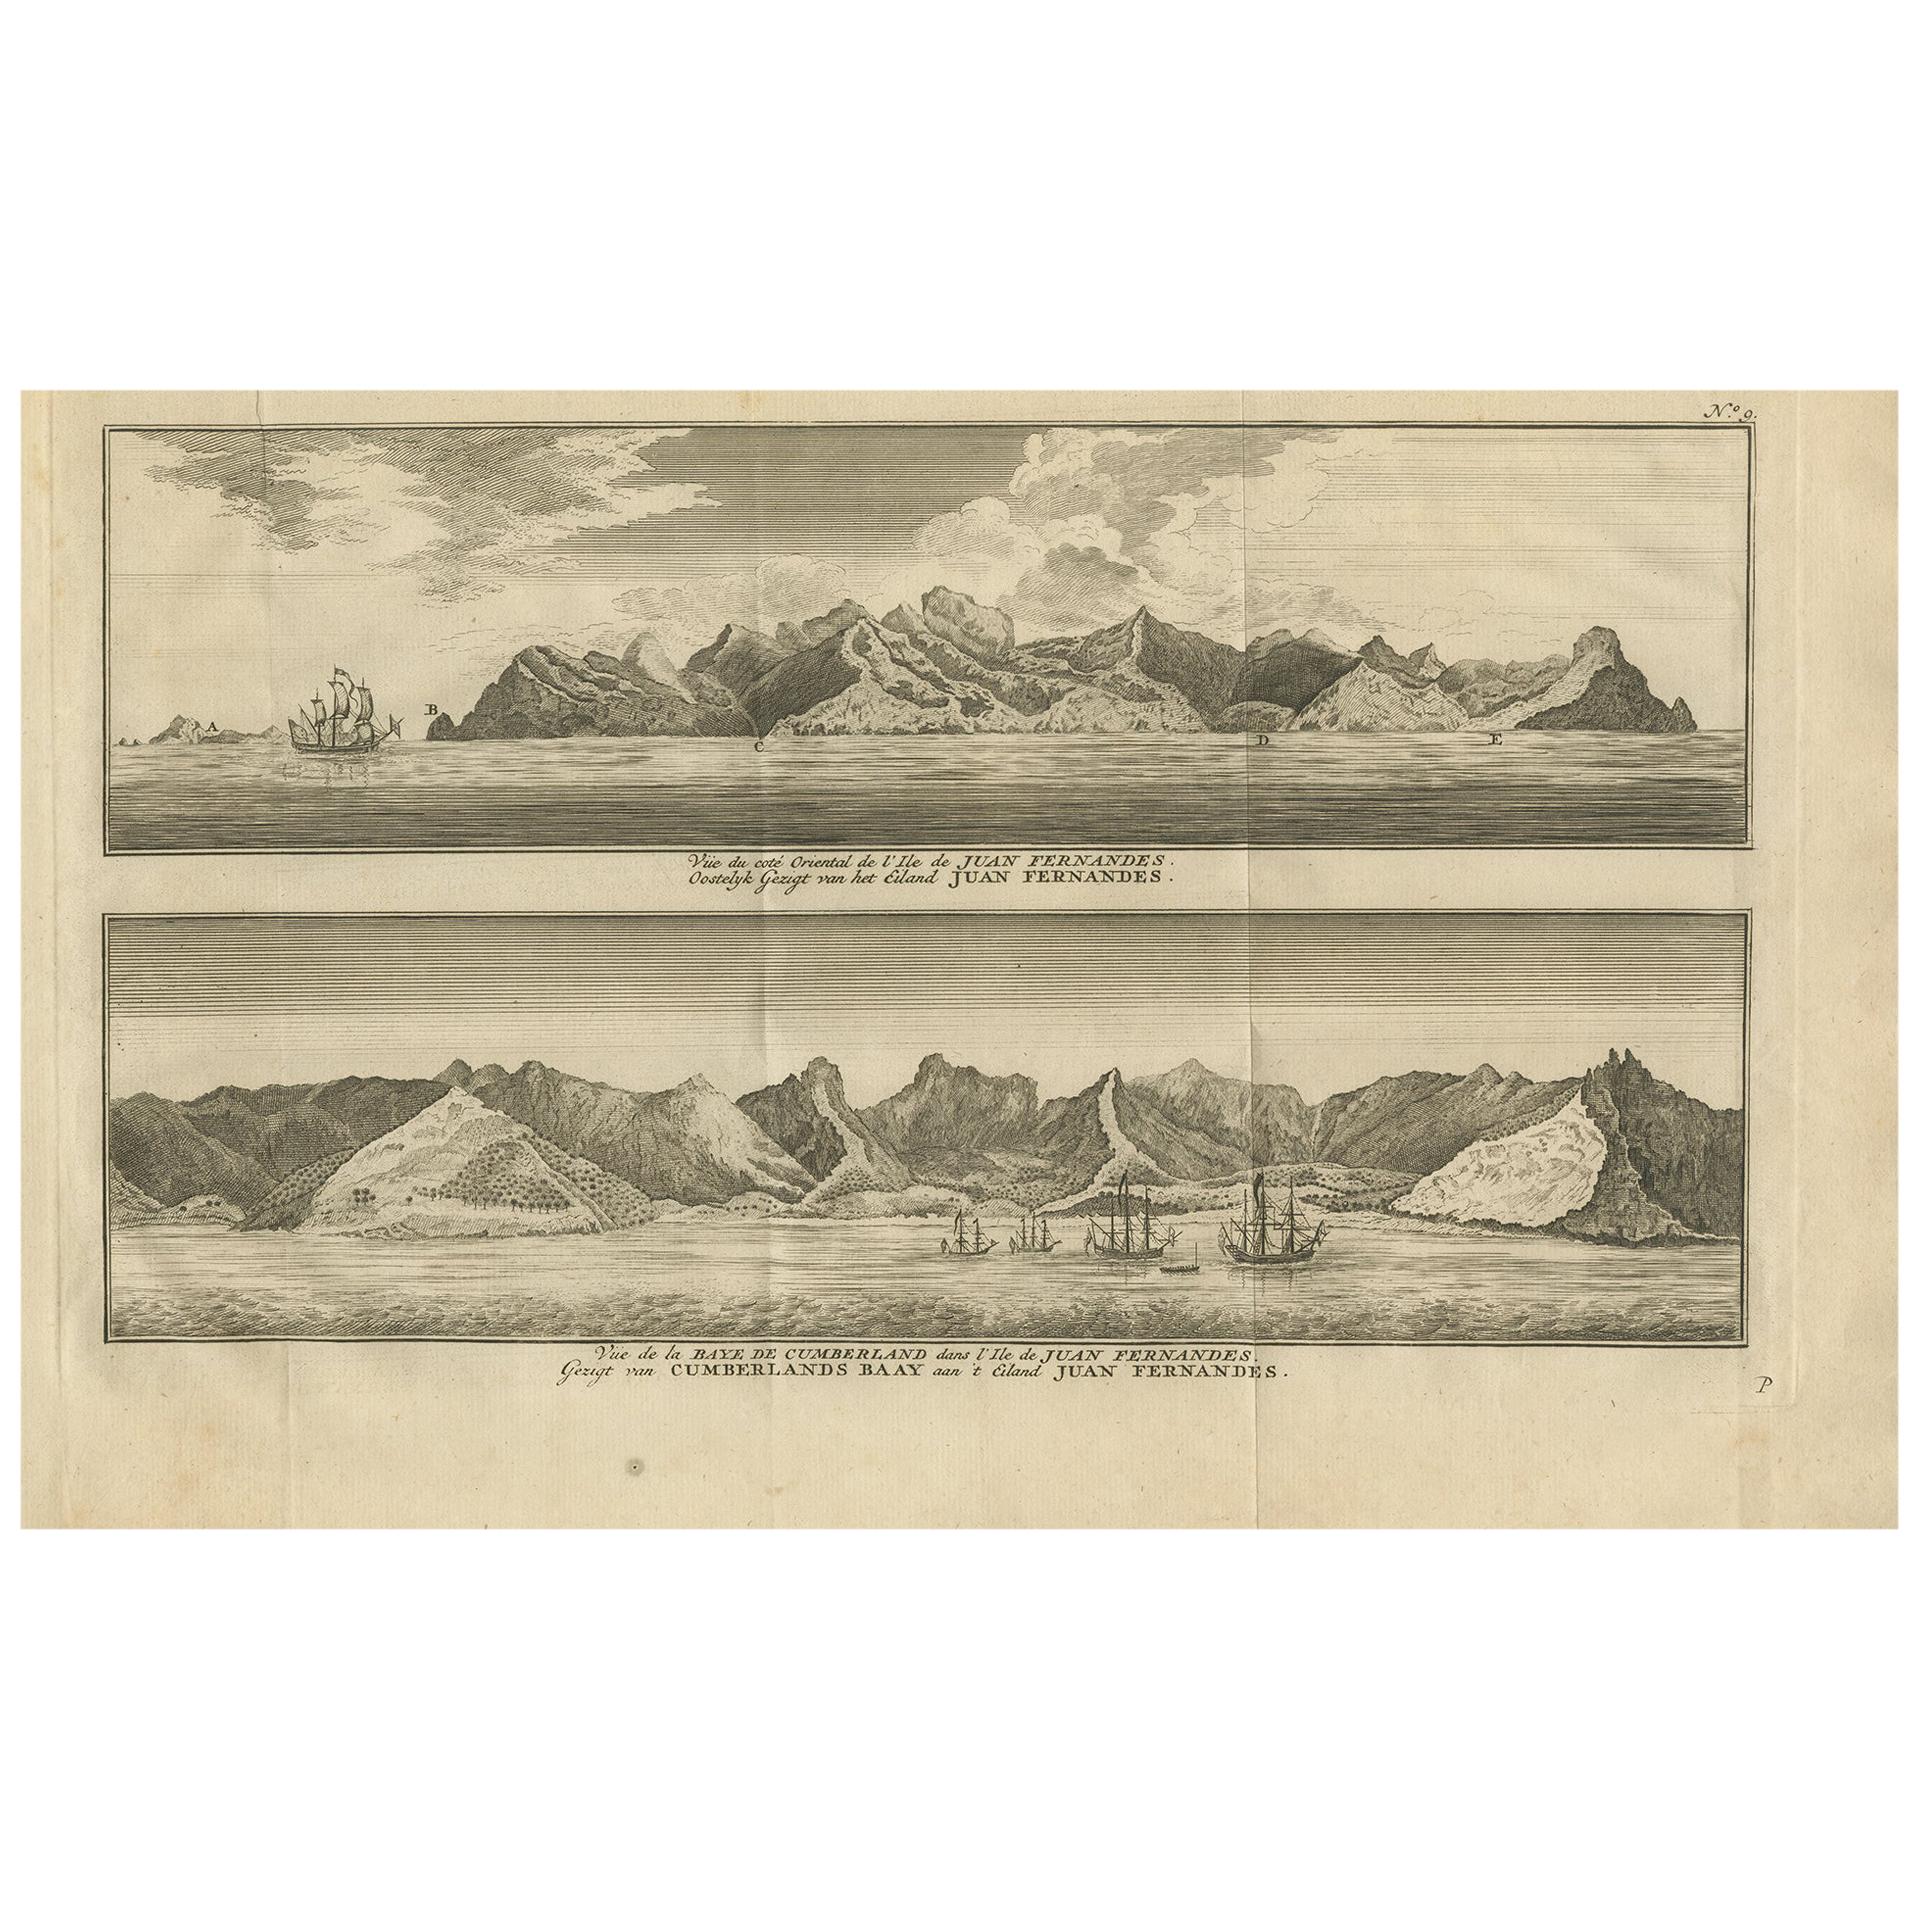 Antique Print of Cumberland Bay and Juan Fernandez Island by Anson, 1749